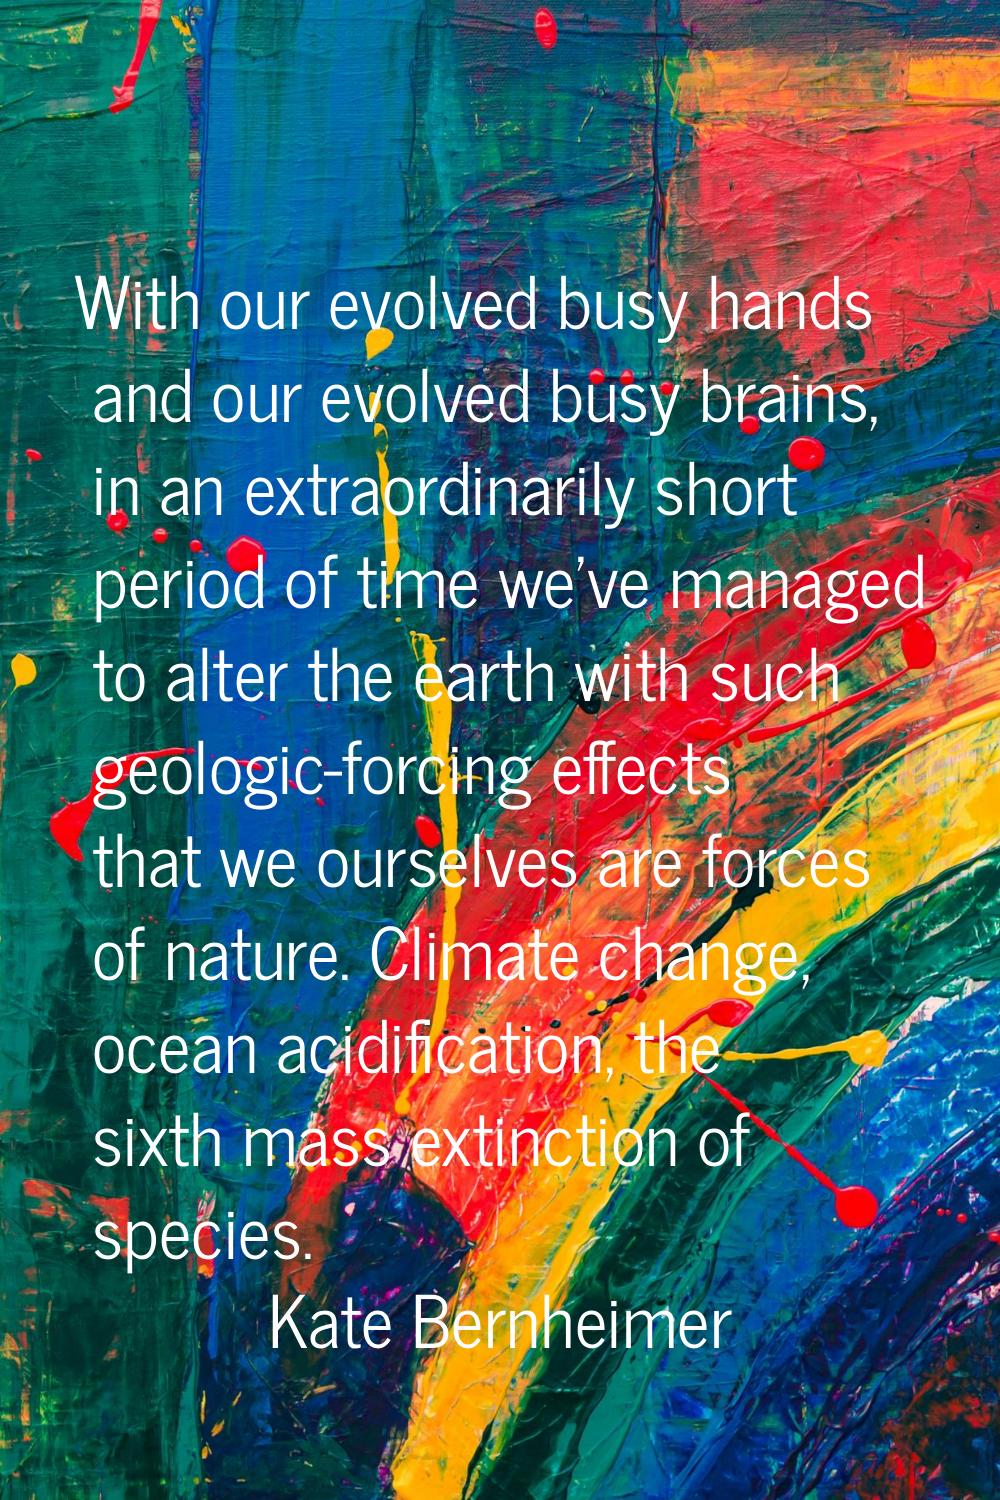 With our evolved busy hands and our evolved busy brains, in an extraordinarily short period of time